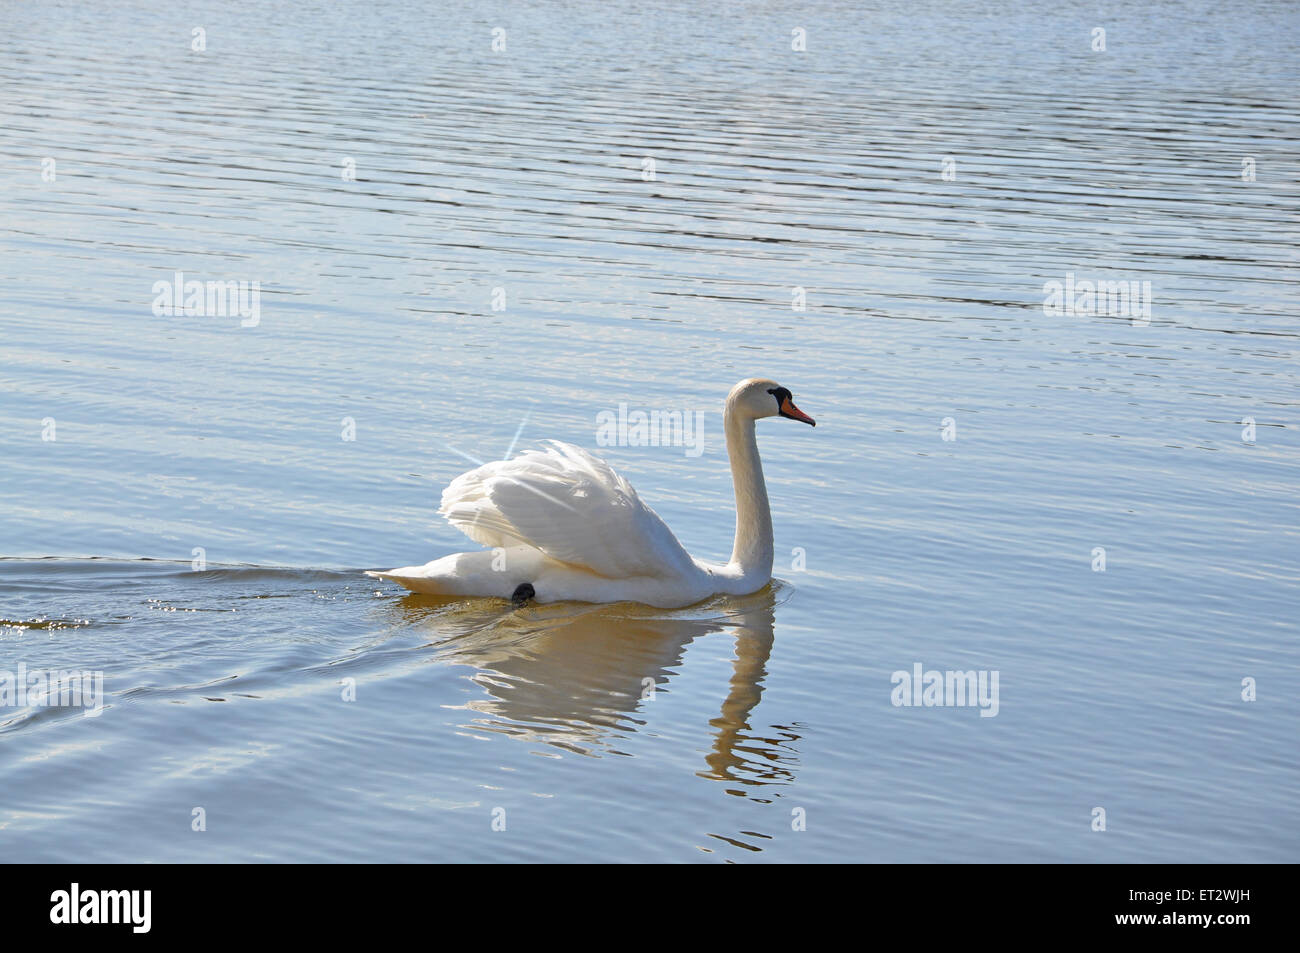 White swan swimming in blue water with small star effect. Stock Photo